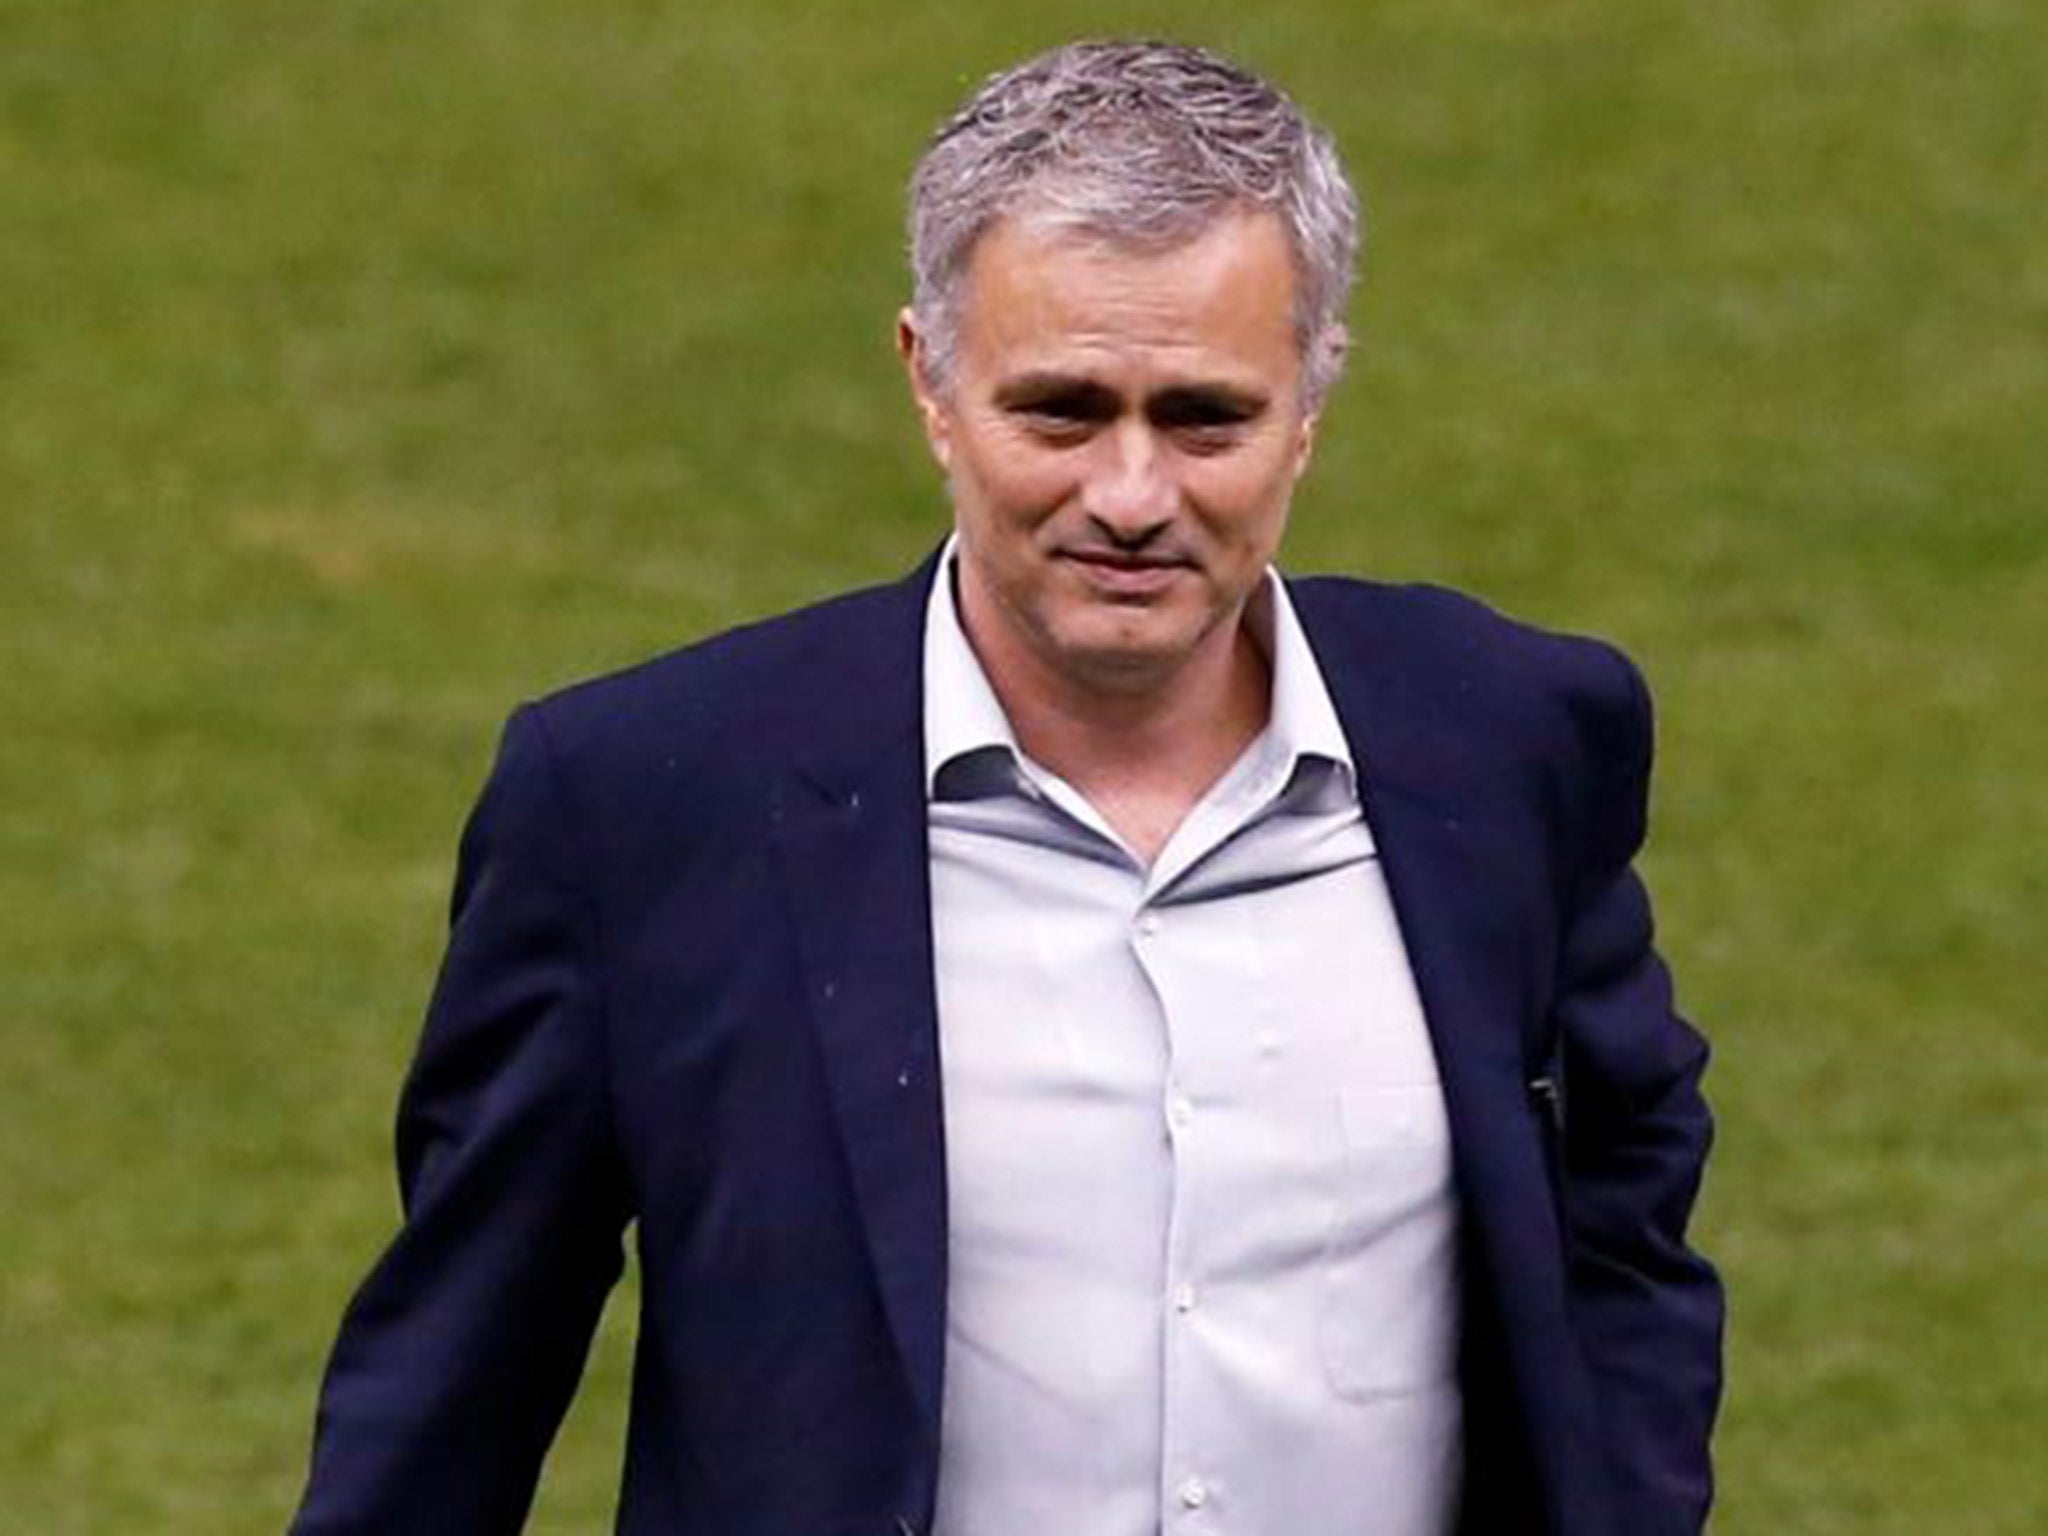 Jose Mourinho has been out of work since leaving Chelsea in December